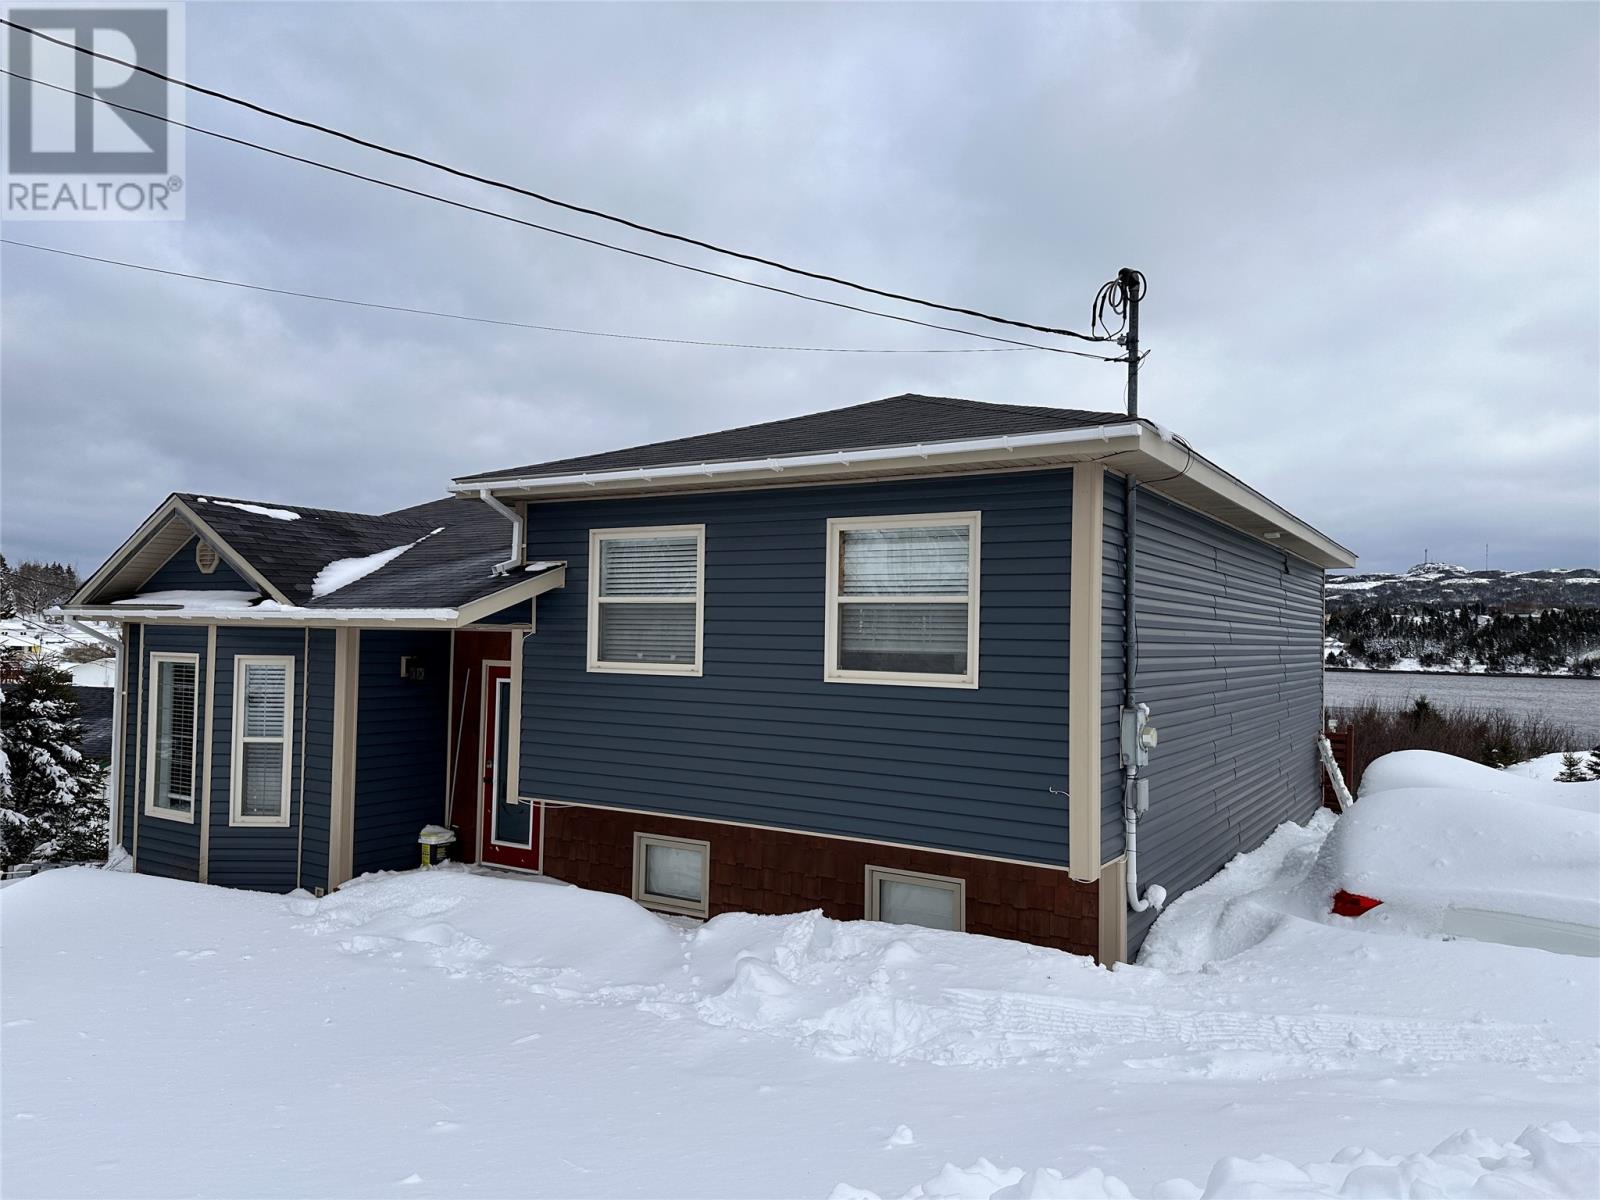 1 Mitchells Road, Marystown, A0E2M0, 4 Bedrooms Bedrooms, ,2 BathroomsBathrooms,Single Family,For sale,Mitchells,1268524